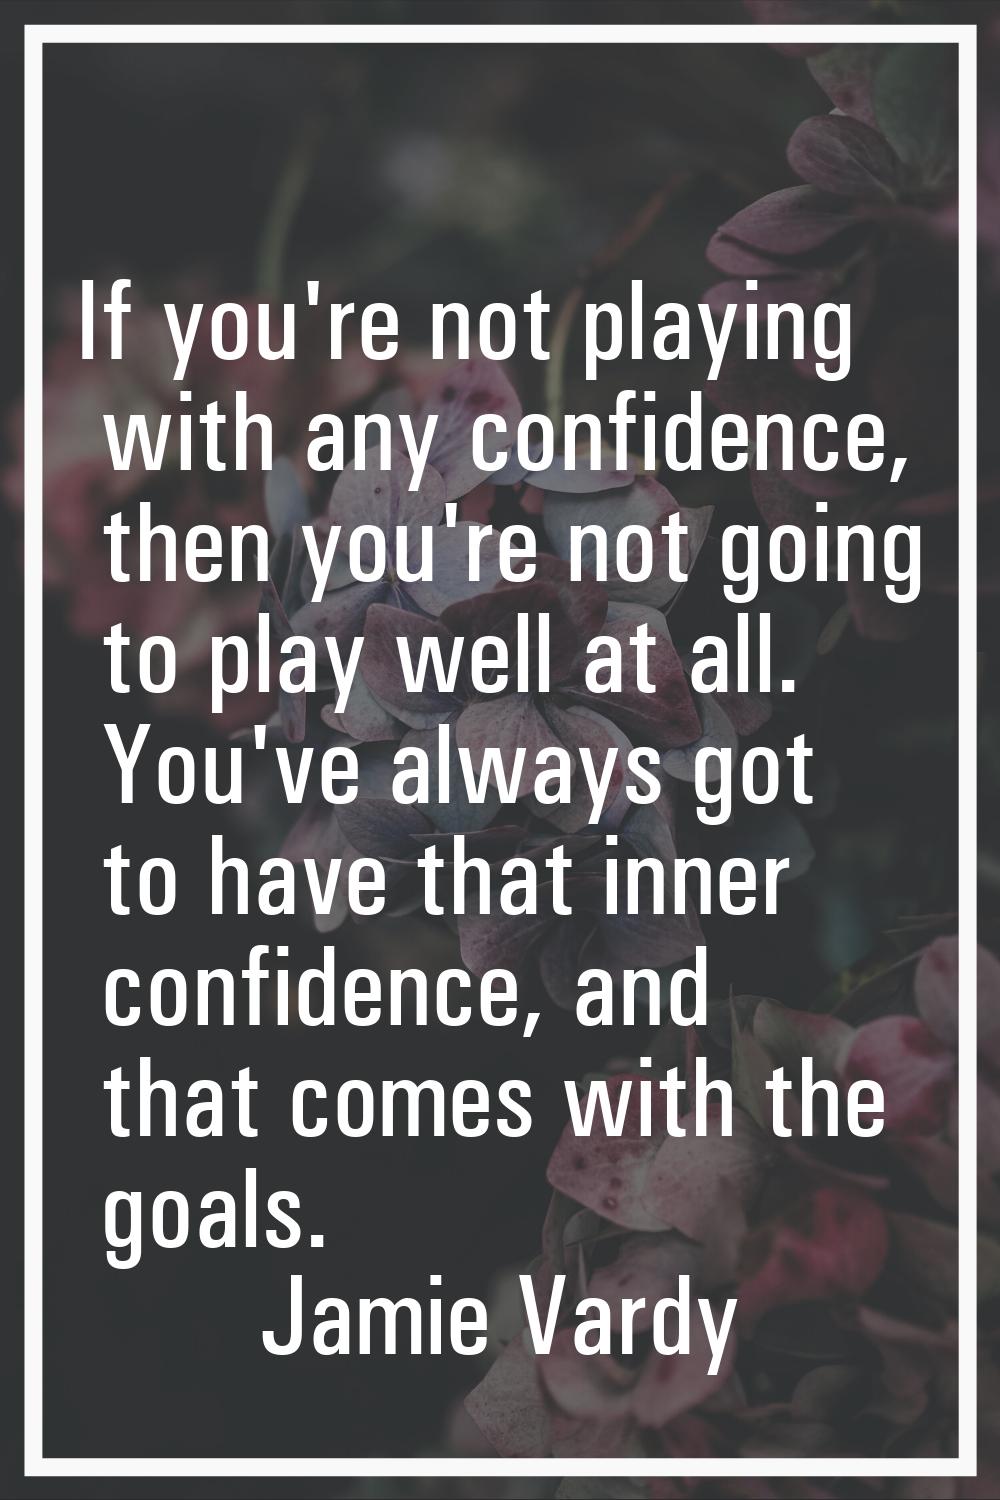 If you're not playing with any confidence, then you're not going to play well at all. You've always